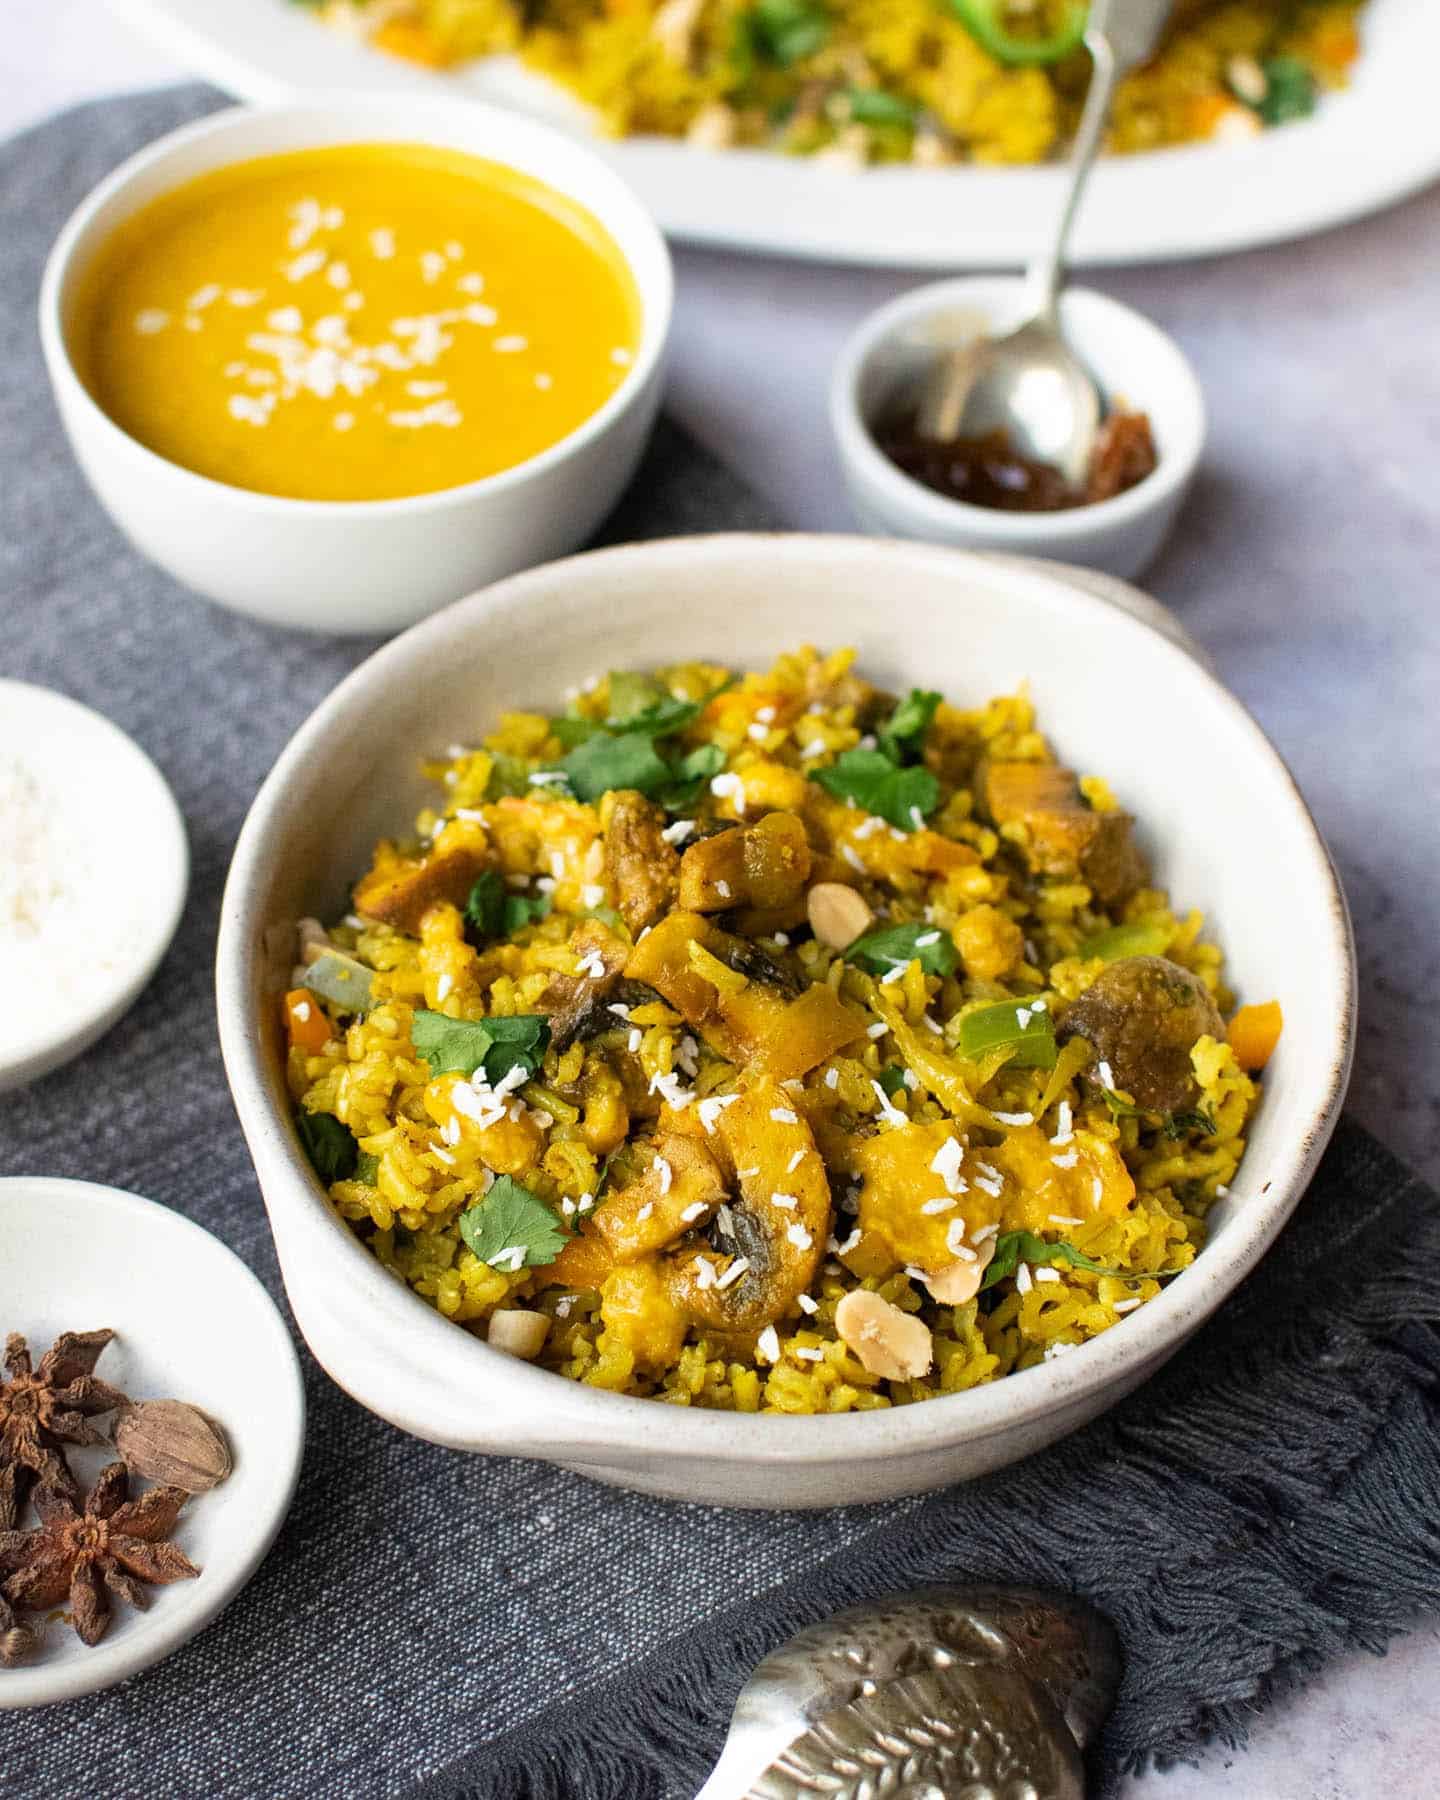 Mushroom biyani in a small white dish with two ridges for handles, with spoons next to it and condiments surrounding it too. They include orange biryani gravy, chutney and a big plate of rice in the background